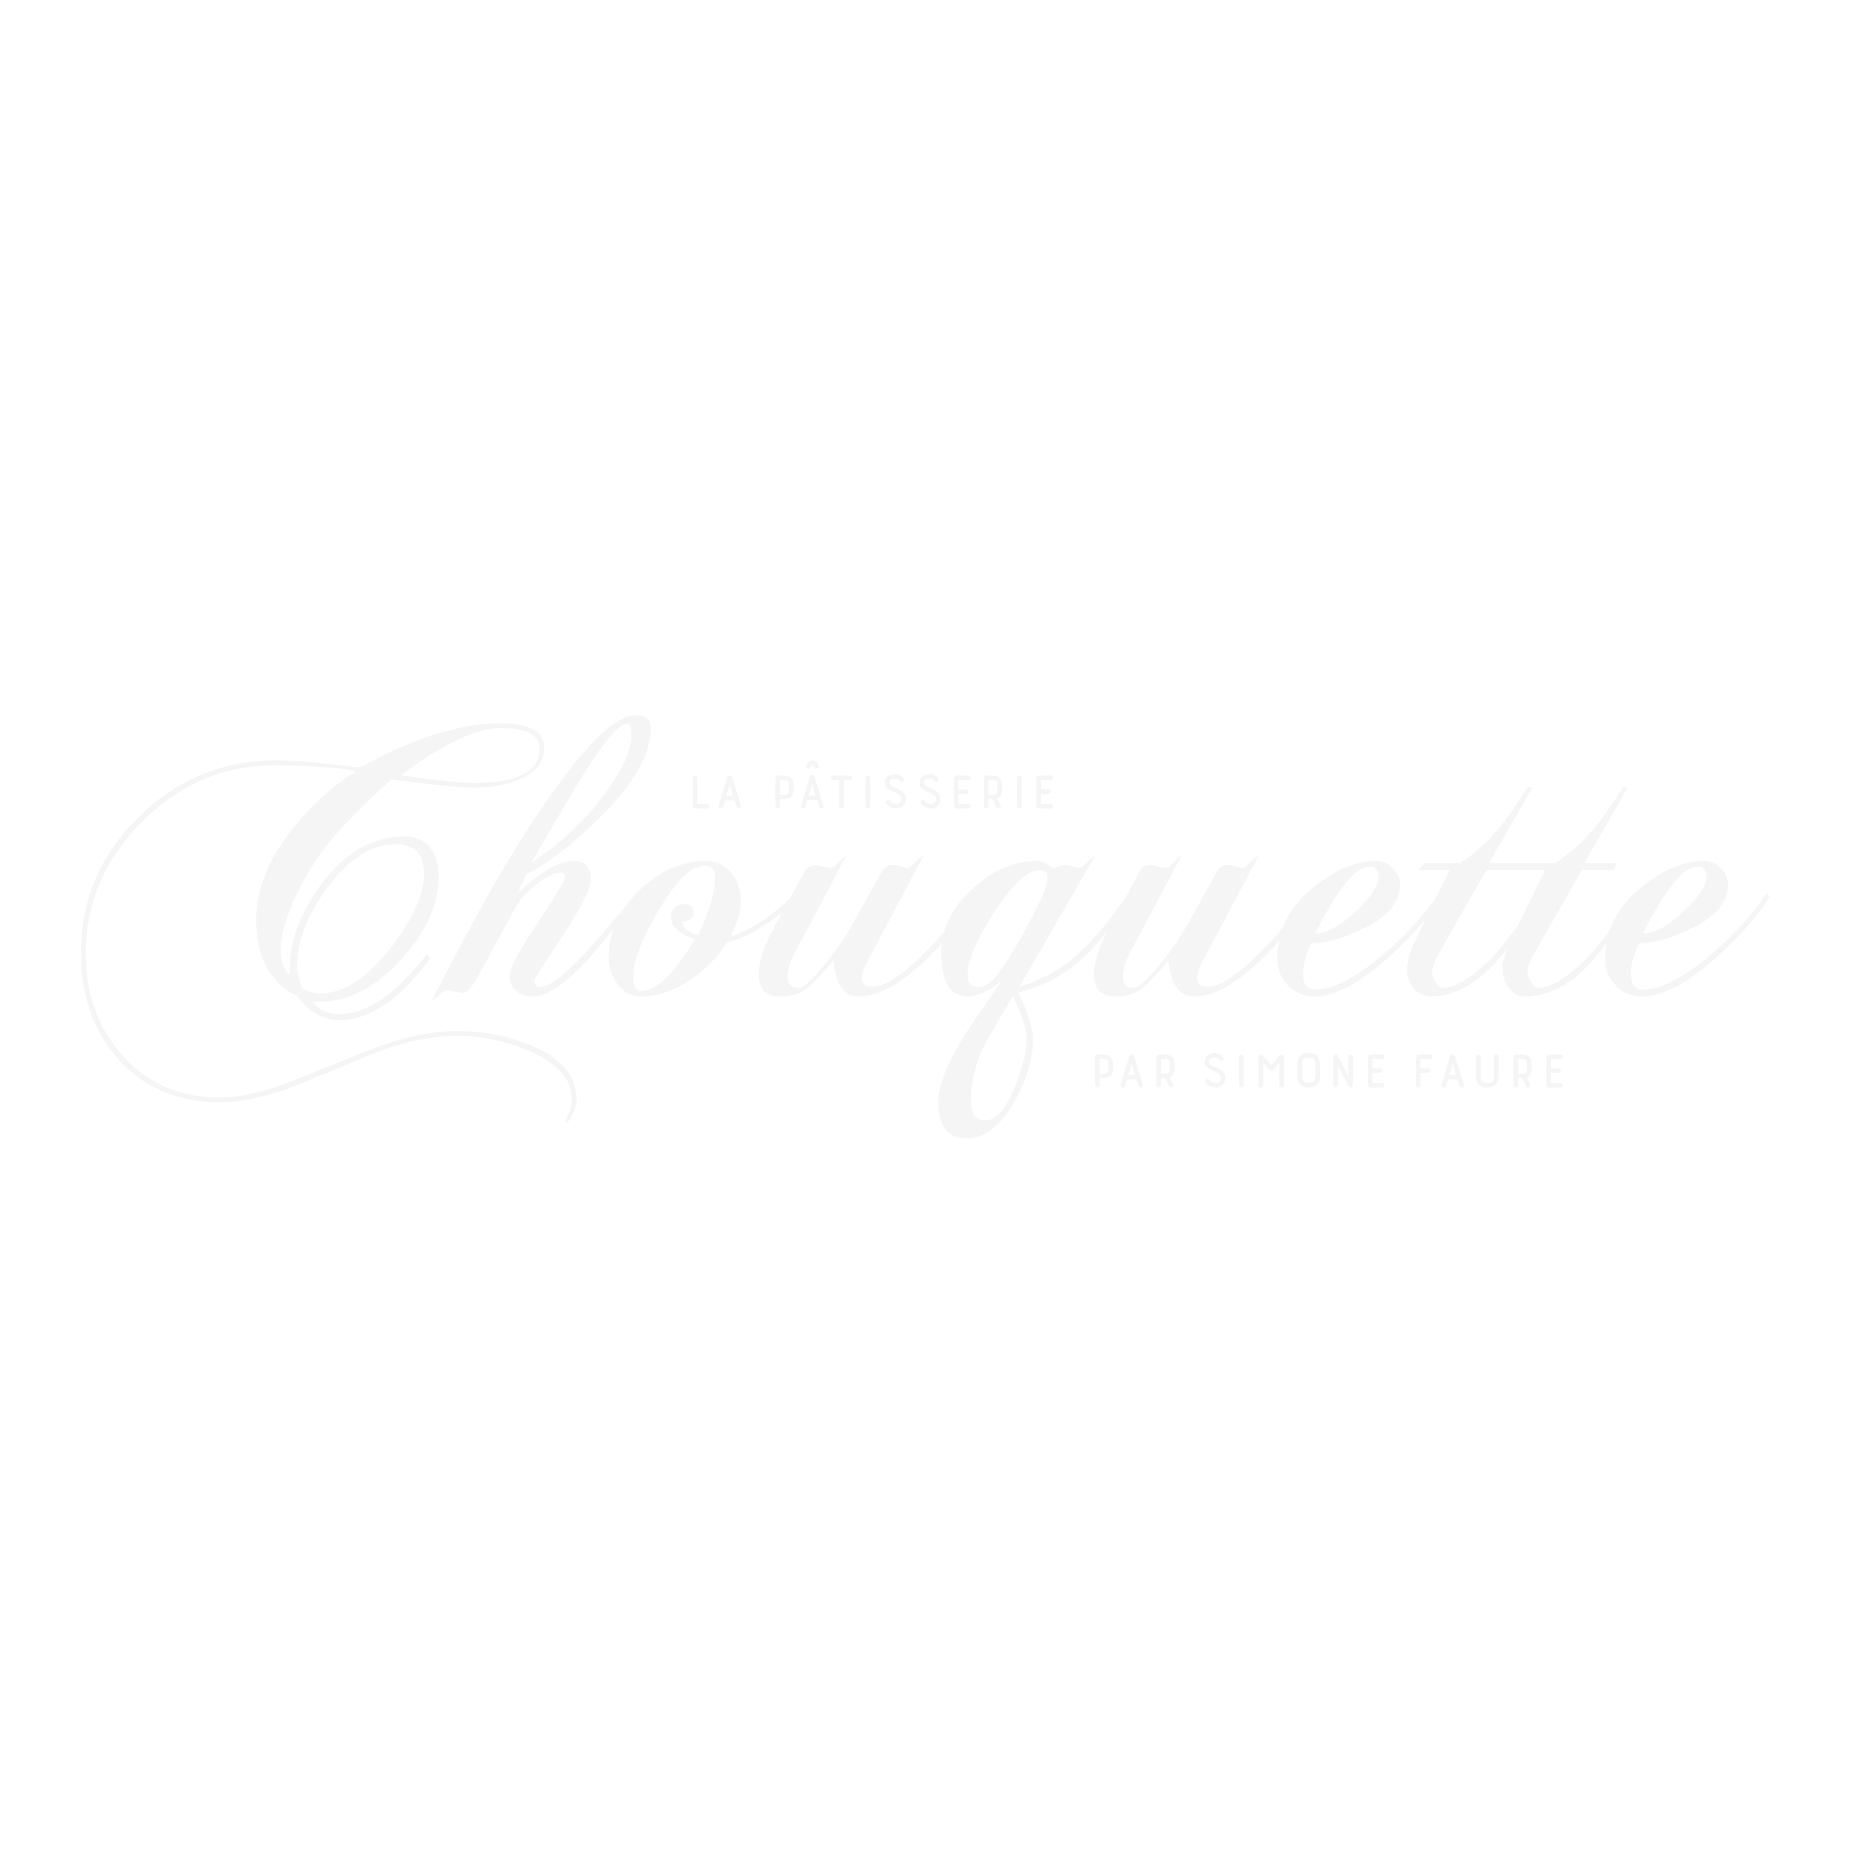 Chouquette.png